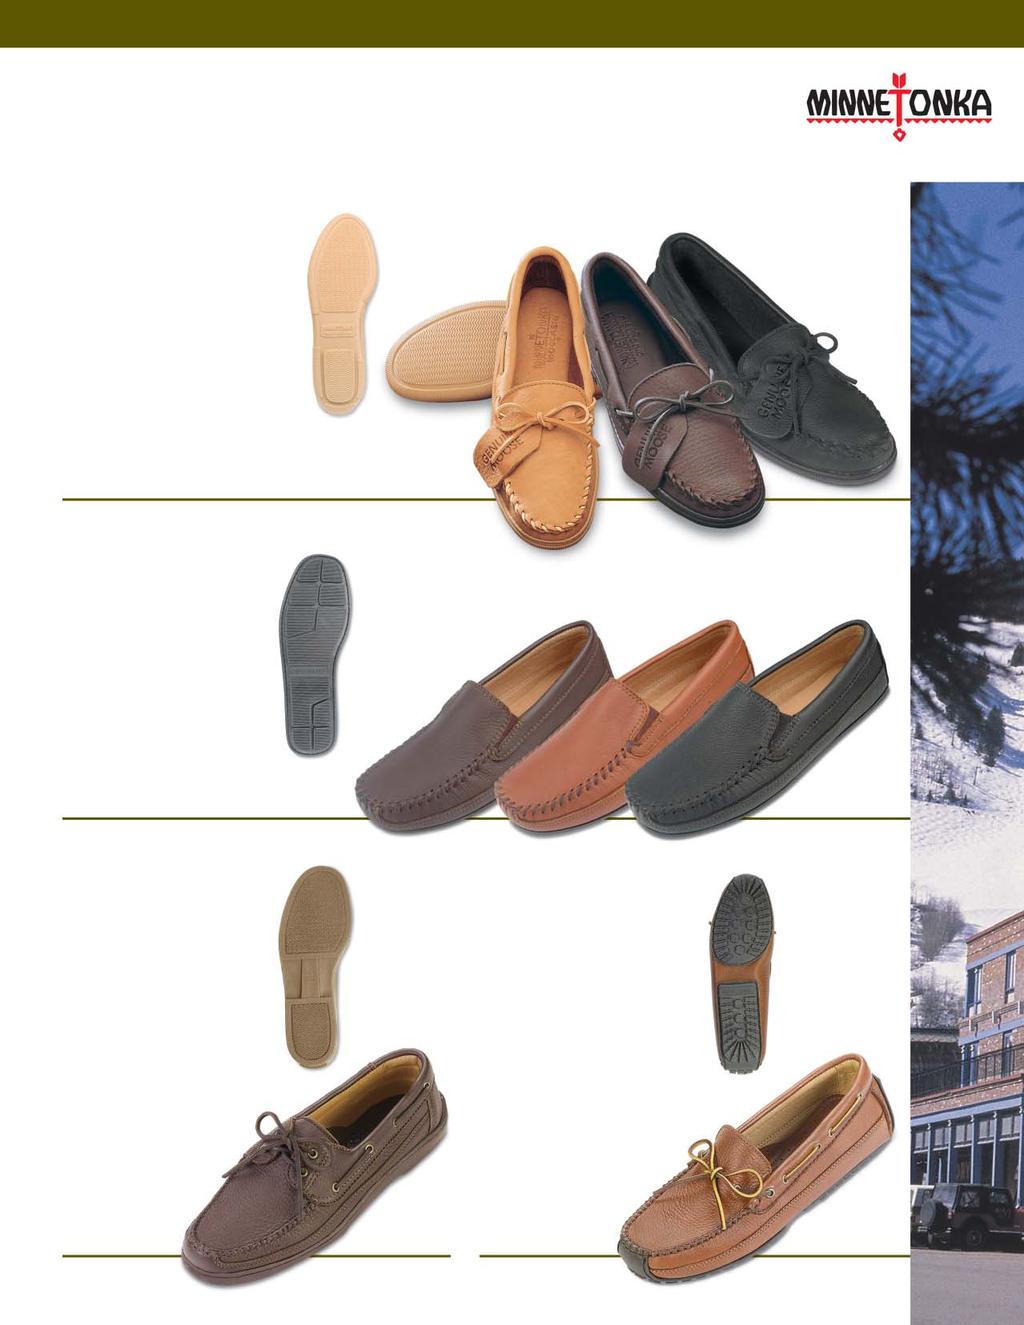 hide Moccasins All Styles In Stock For Immediate Delivery. hide Classic Classic styles made from soft, supple genuine hide. Fully padded insole with lightweight flexible rubber sole.